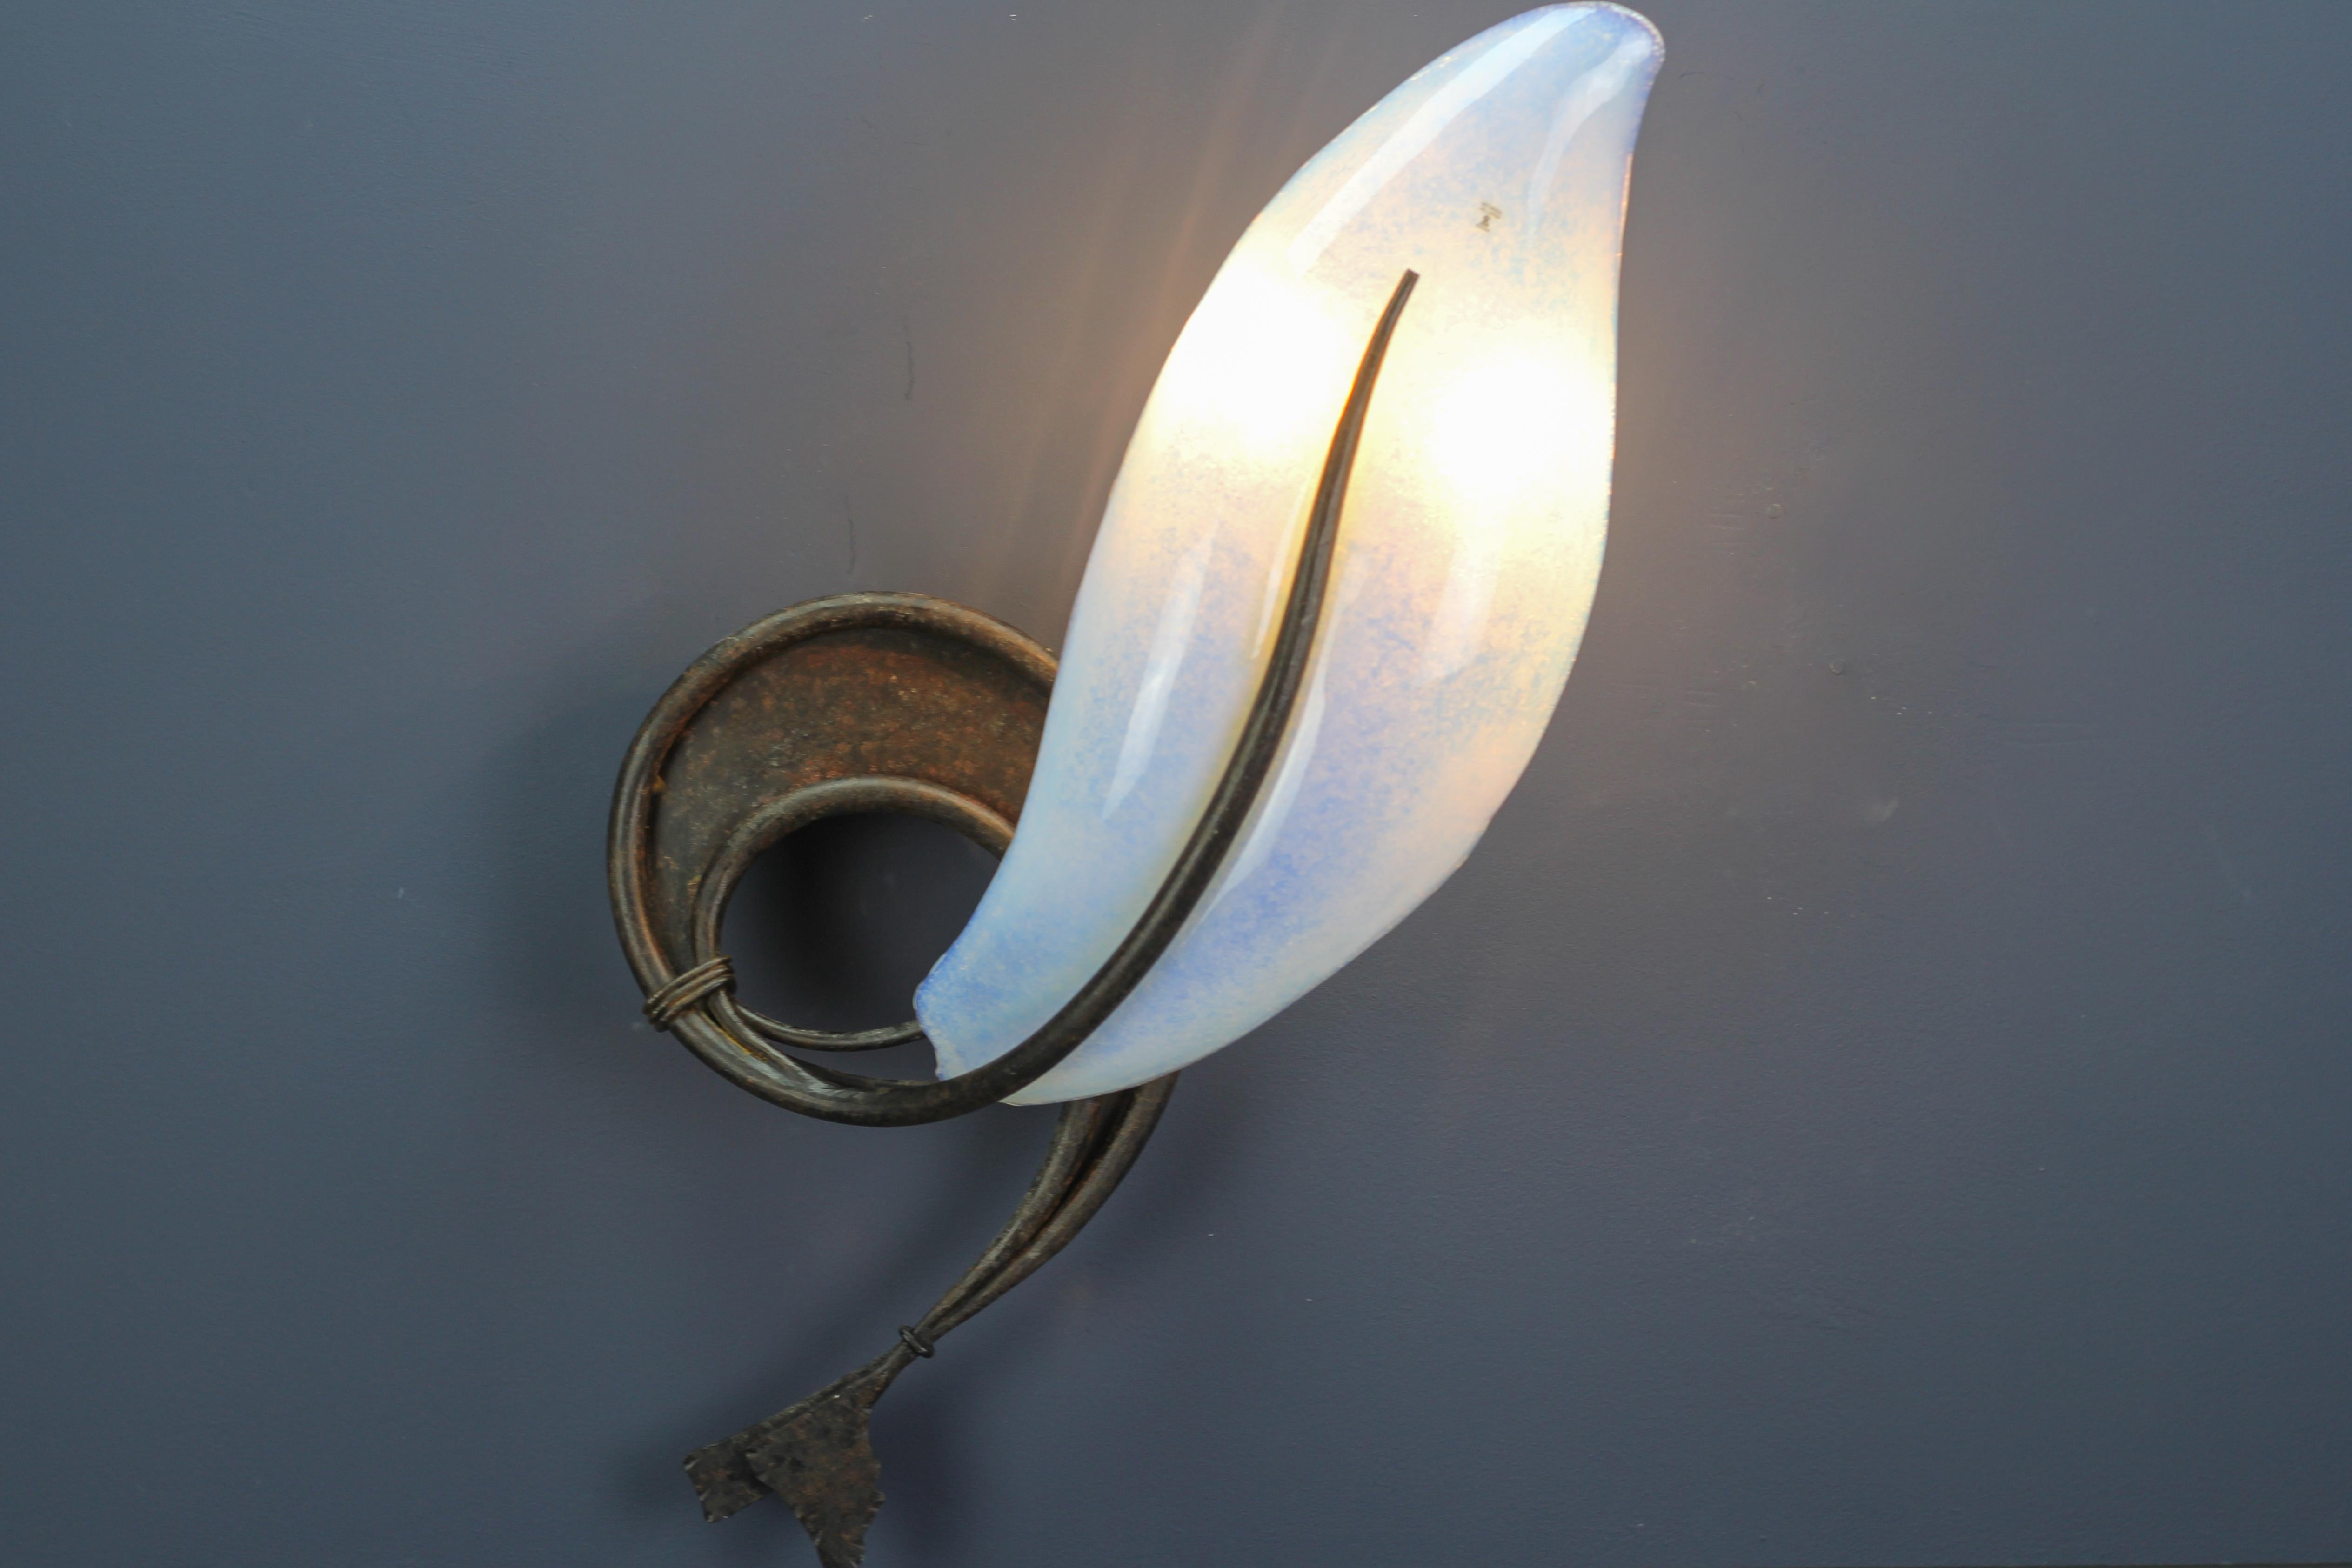 Italian Vetro Murano Venezia opalescent glass and wrought iron wall light from the late 20th century.
This imposing Italian two-light wall lamp features a beautiful opalescent Murano glass lampshade in a shape of a shell or another sea creature and